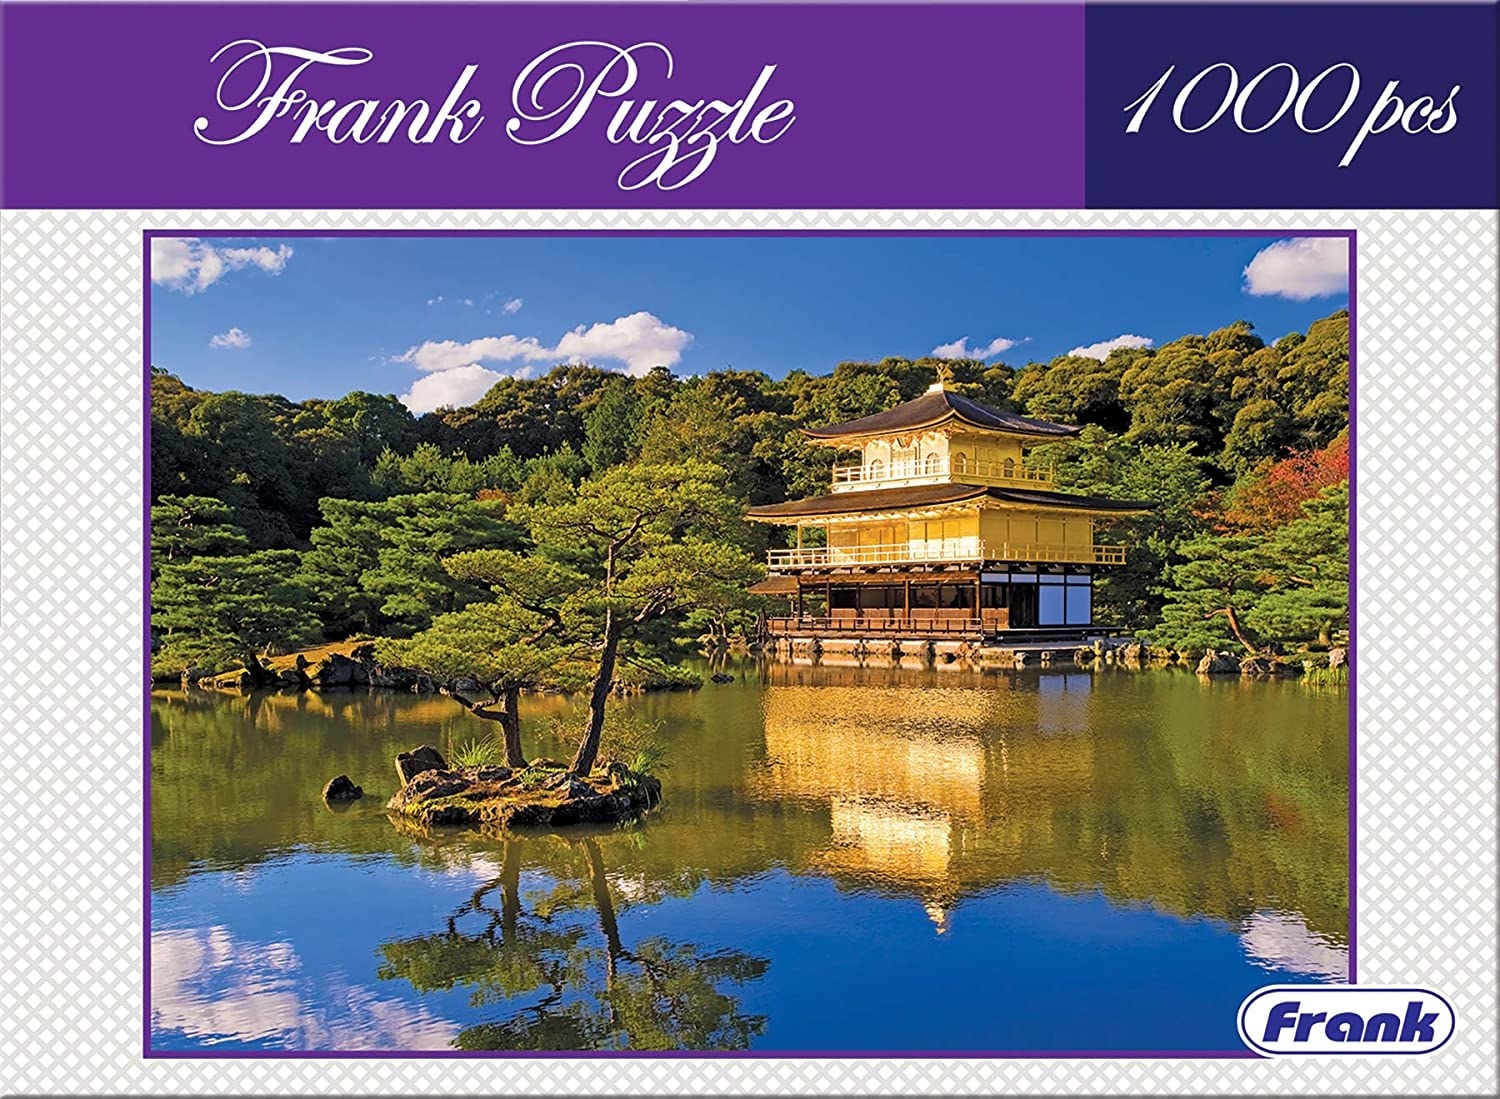 A jigsaw puzzle box showing a lakeside in Japan.